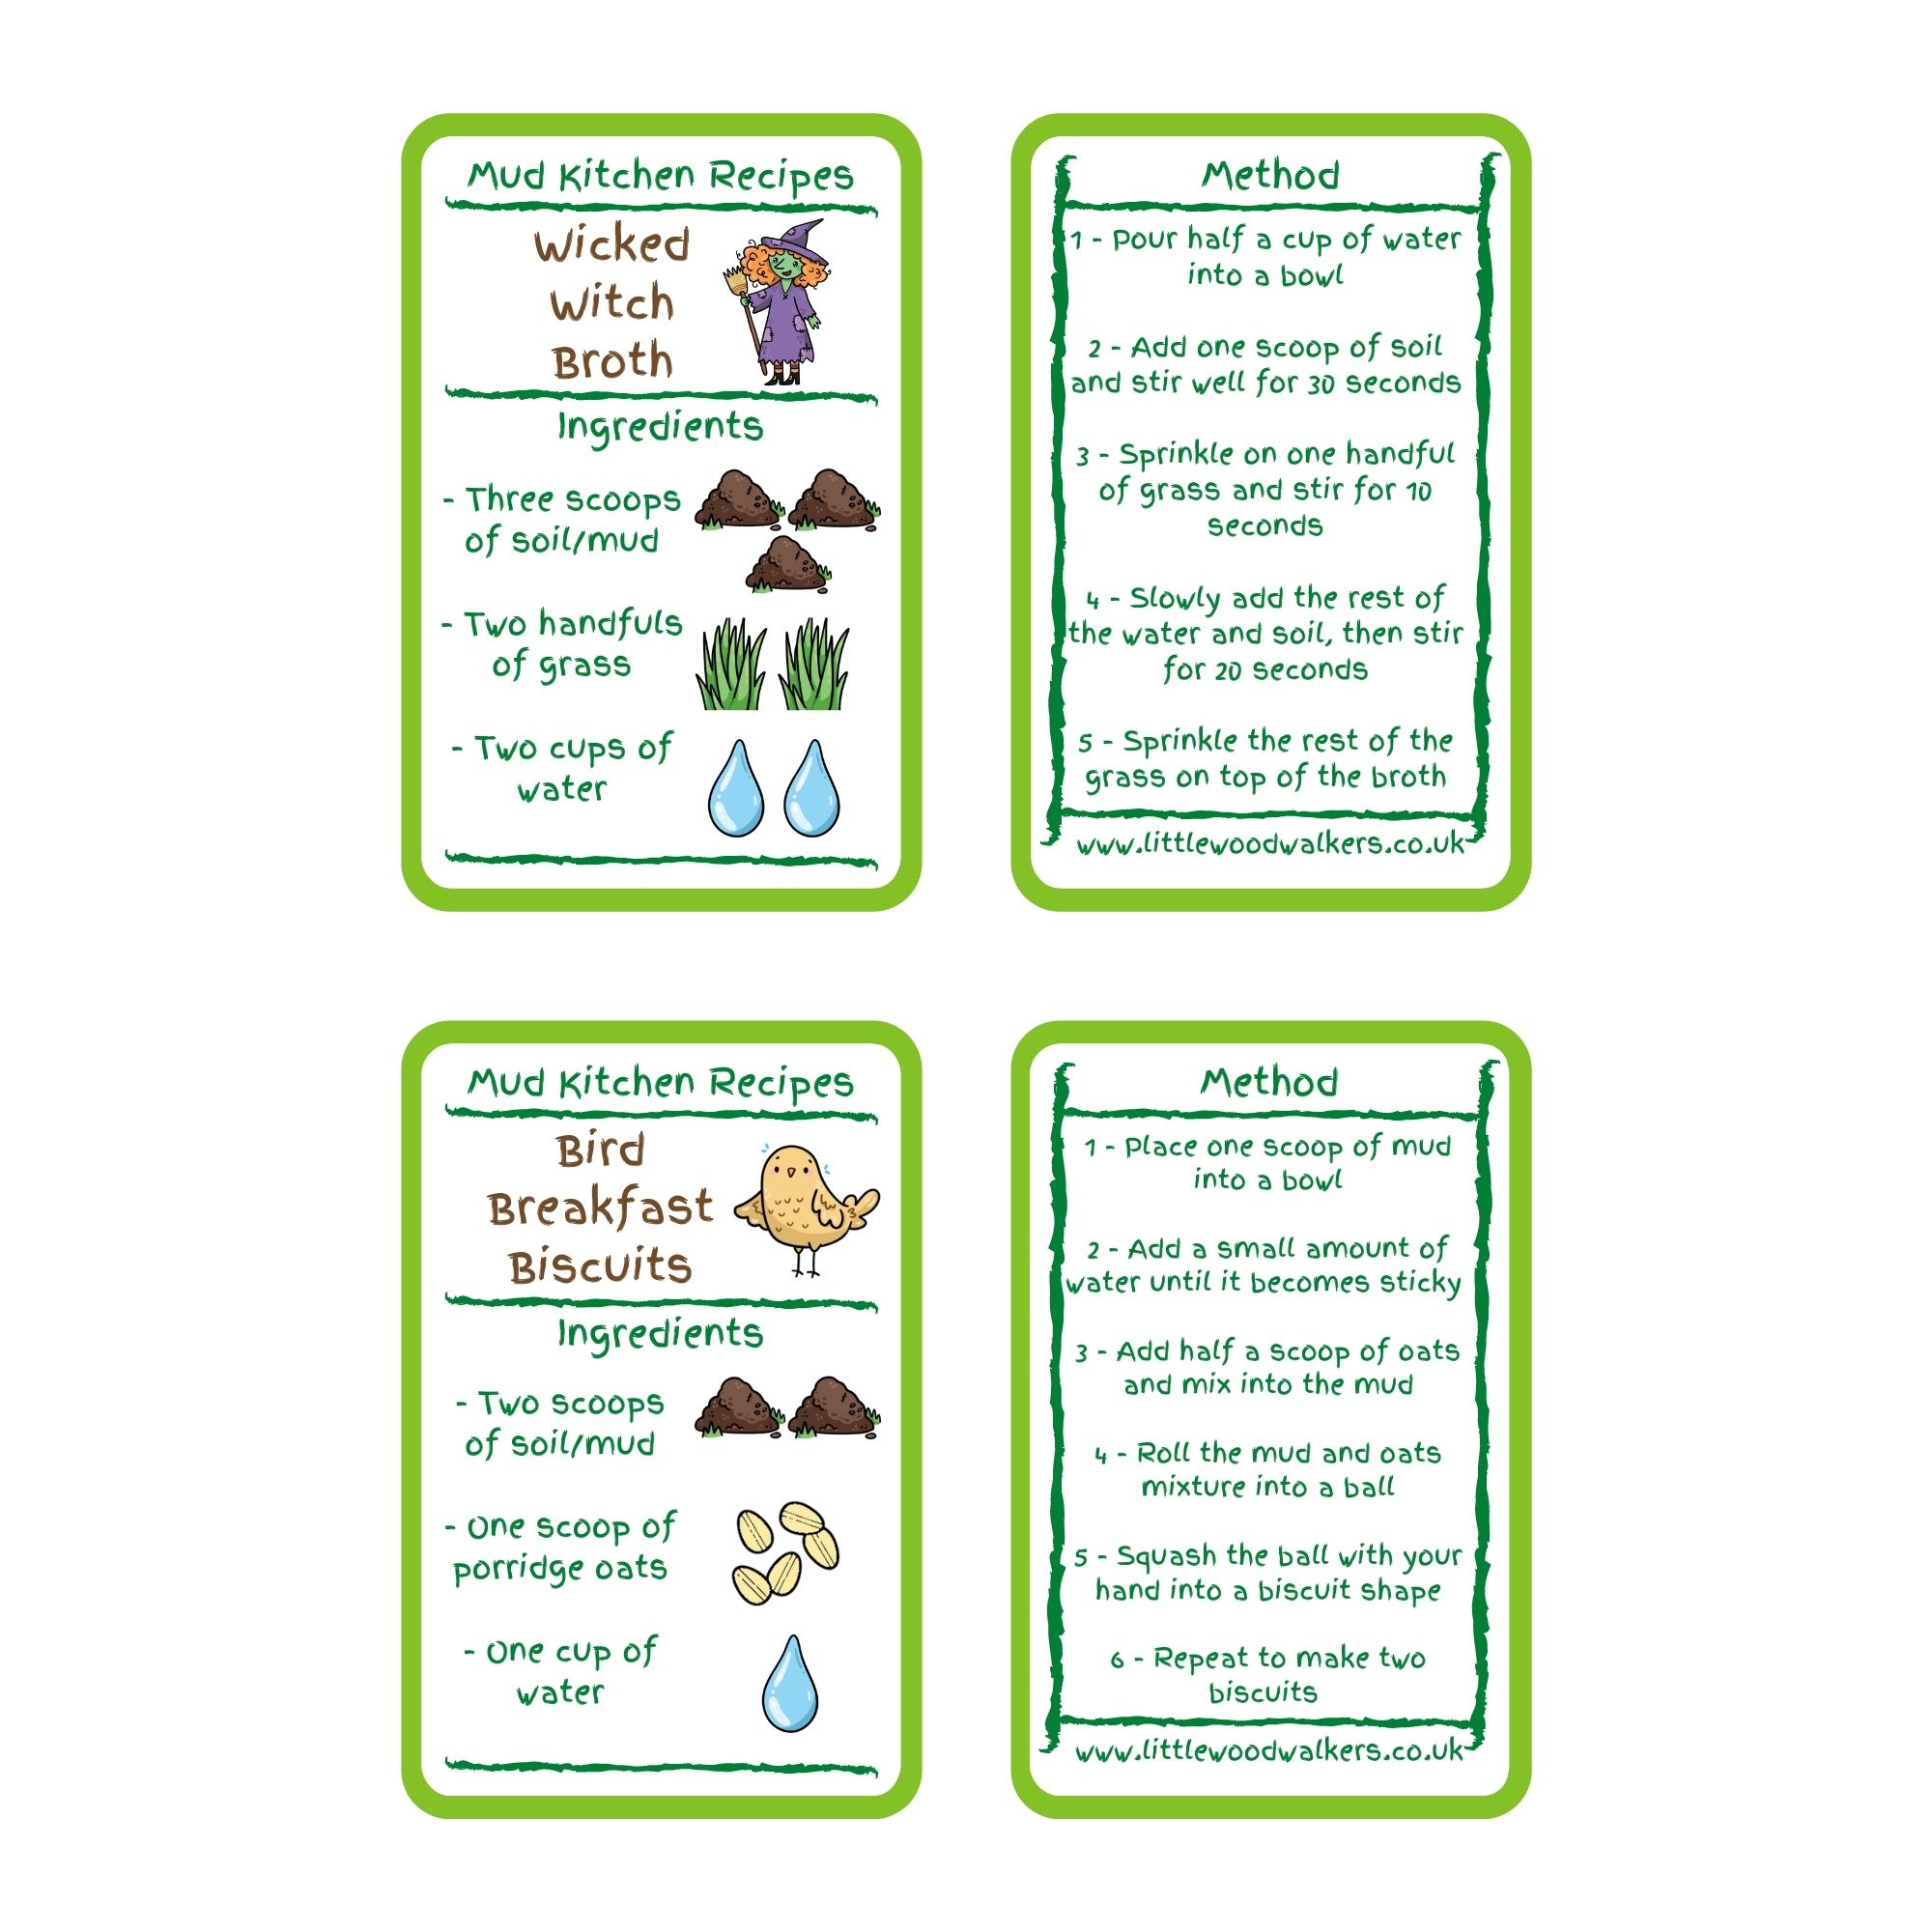 downloadable-mud-kitchen-recipe-cards-to-print-little-wood-walkers